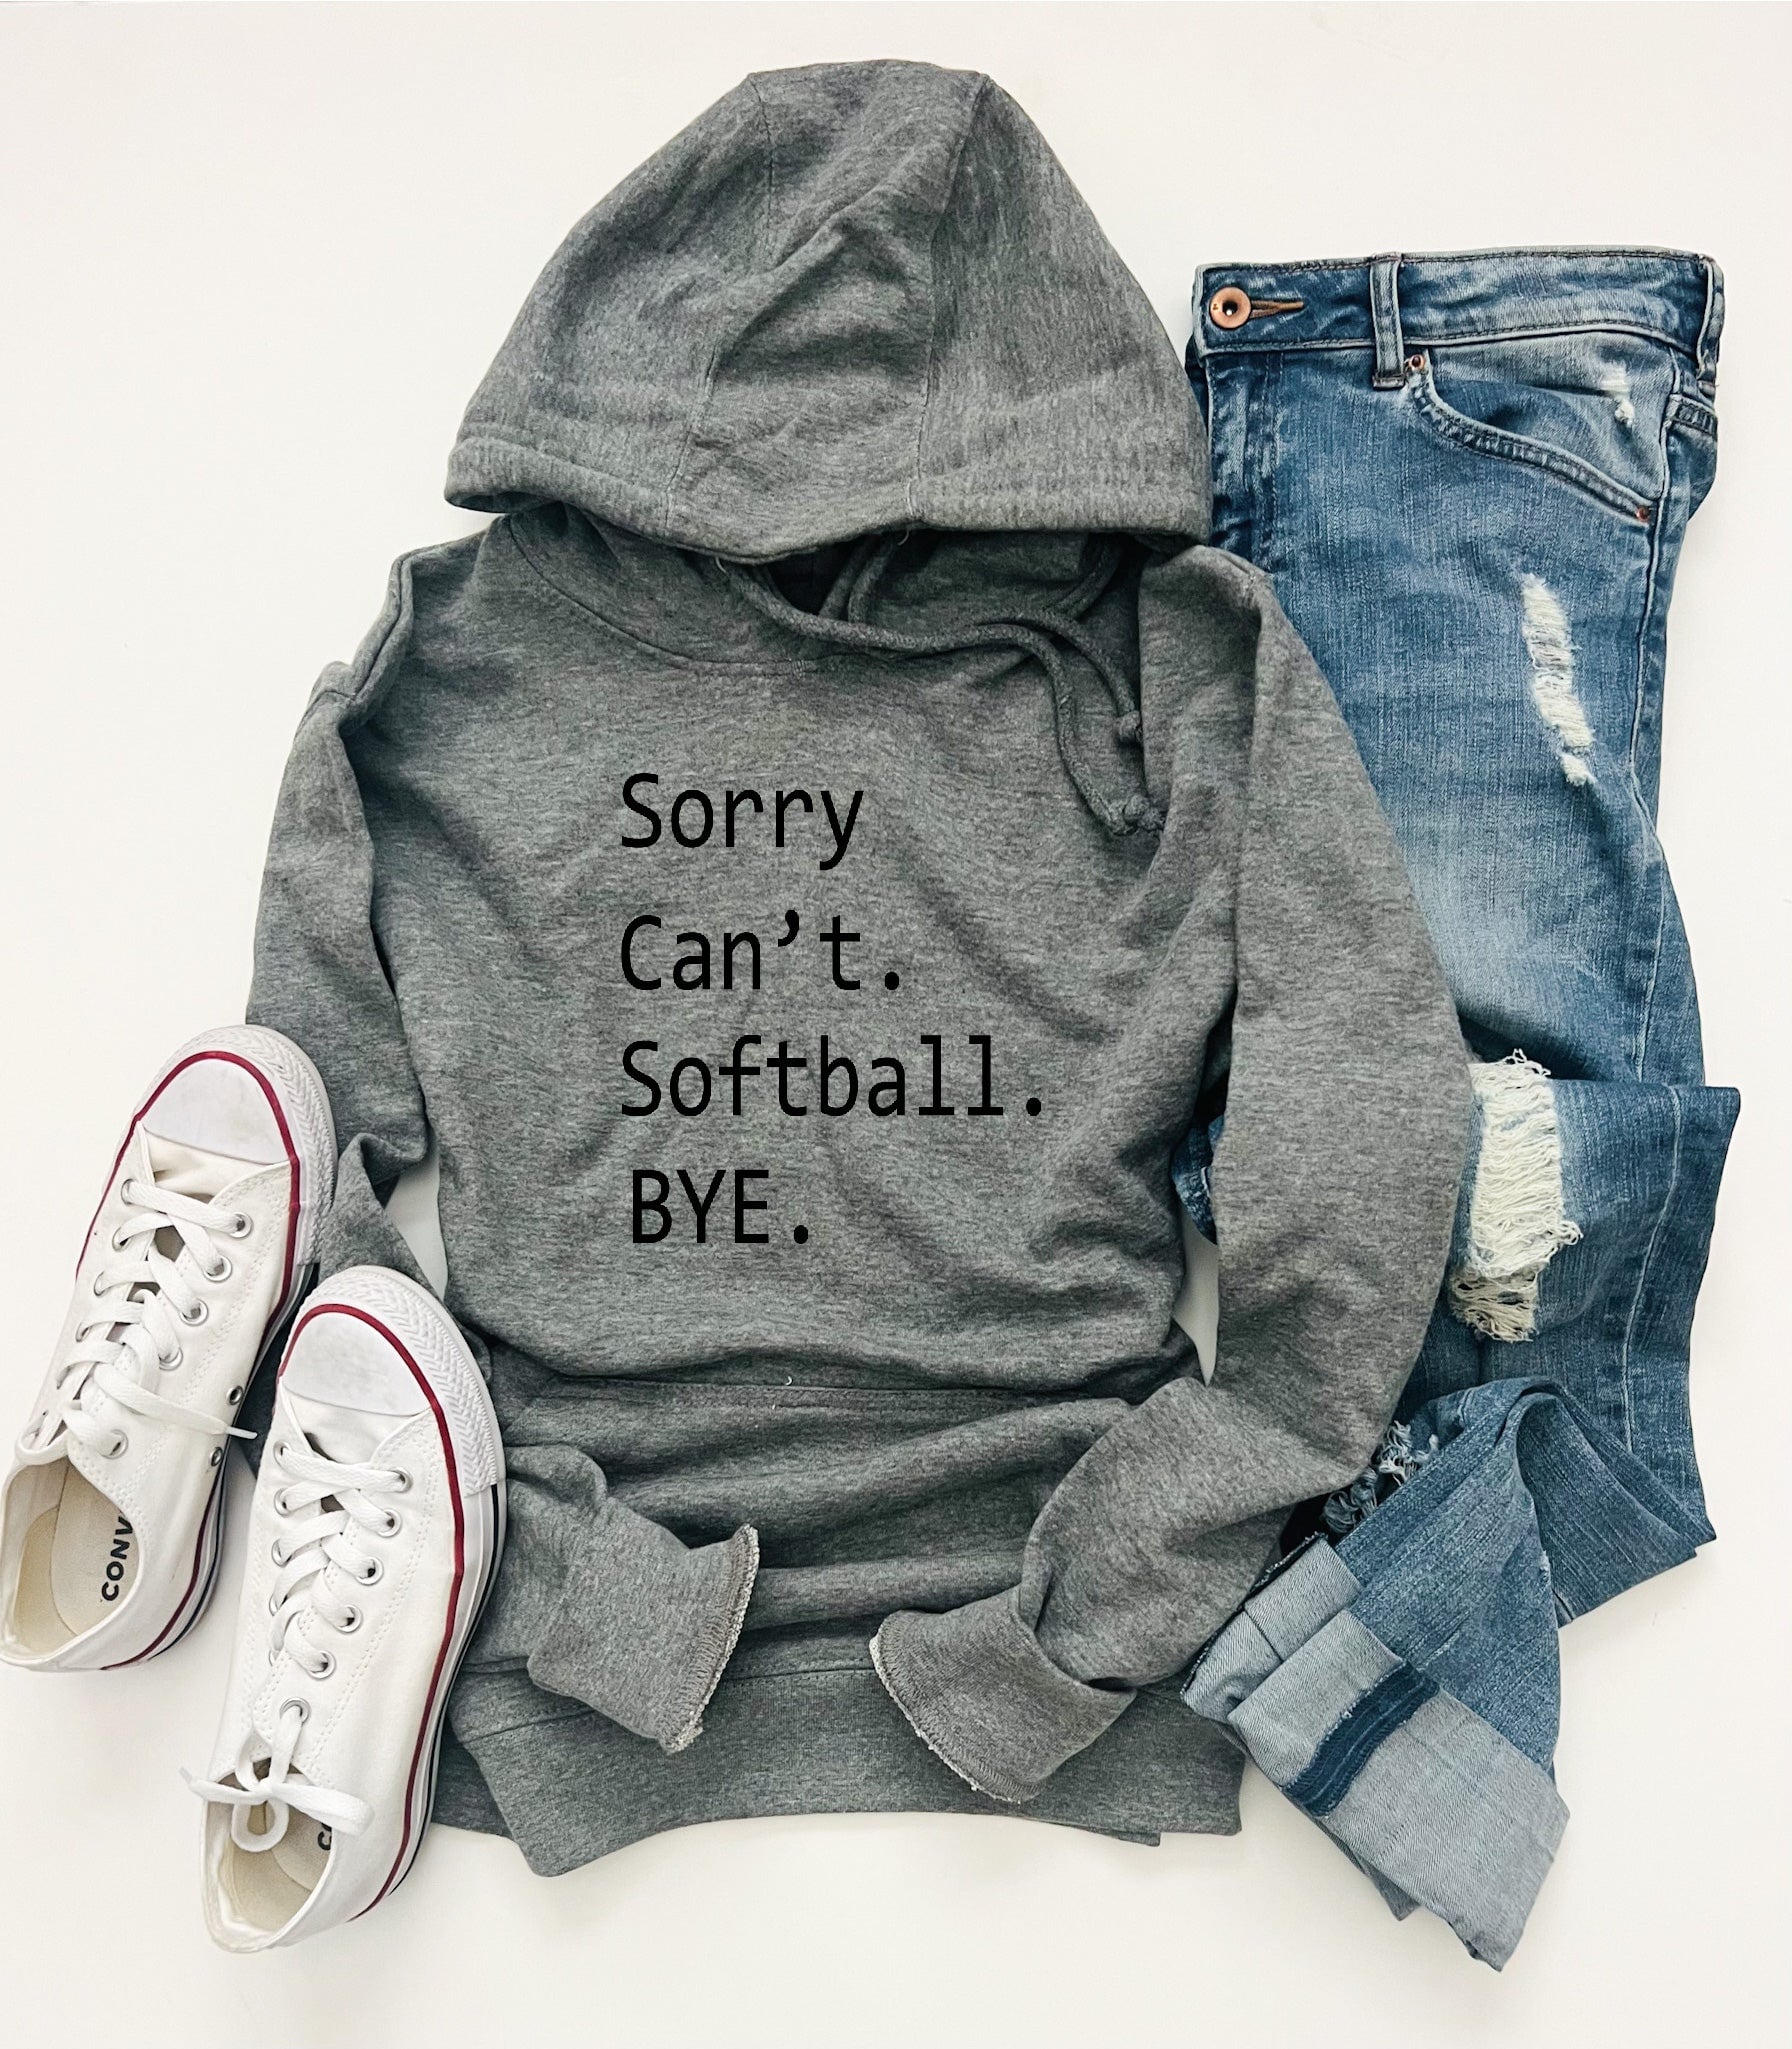 Sorry can't softball French Terry hoodie Baseball hoodie Cotton heritage French Terry hoodie 